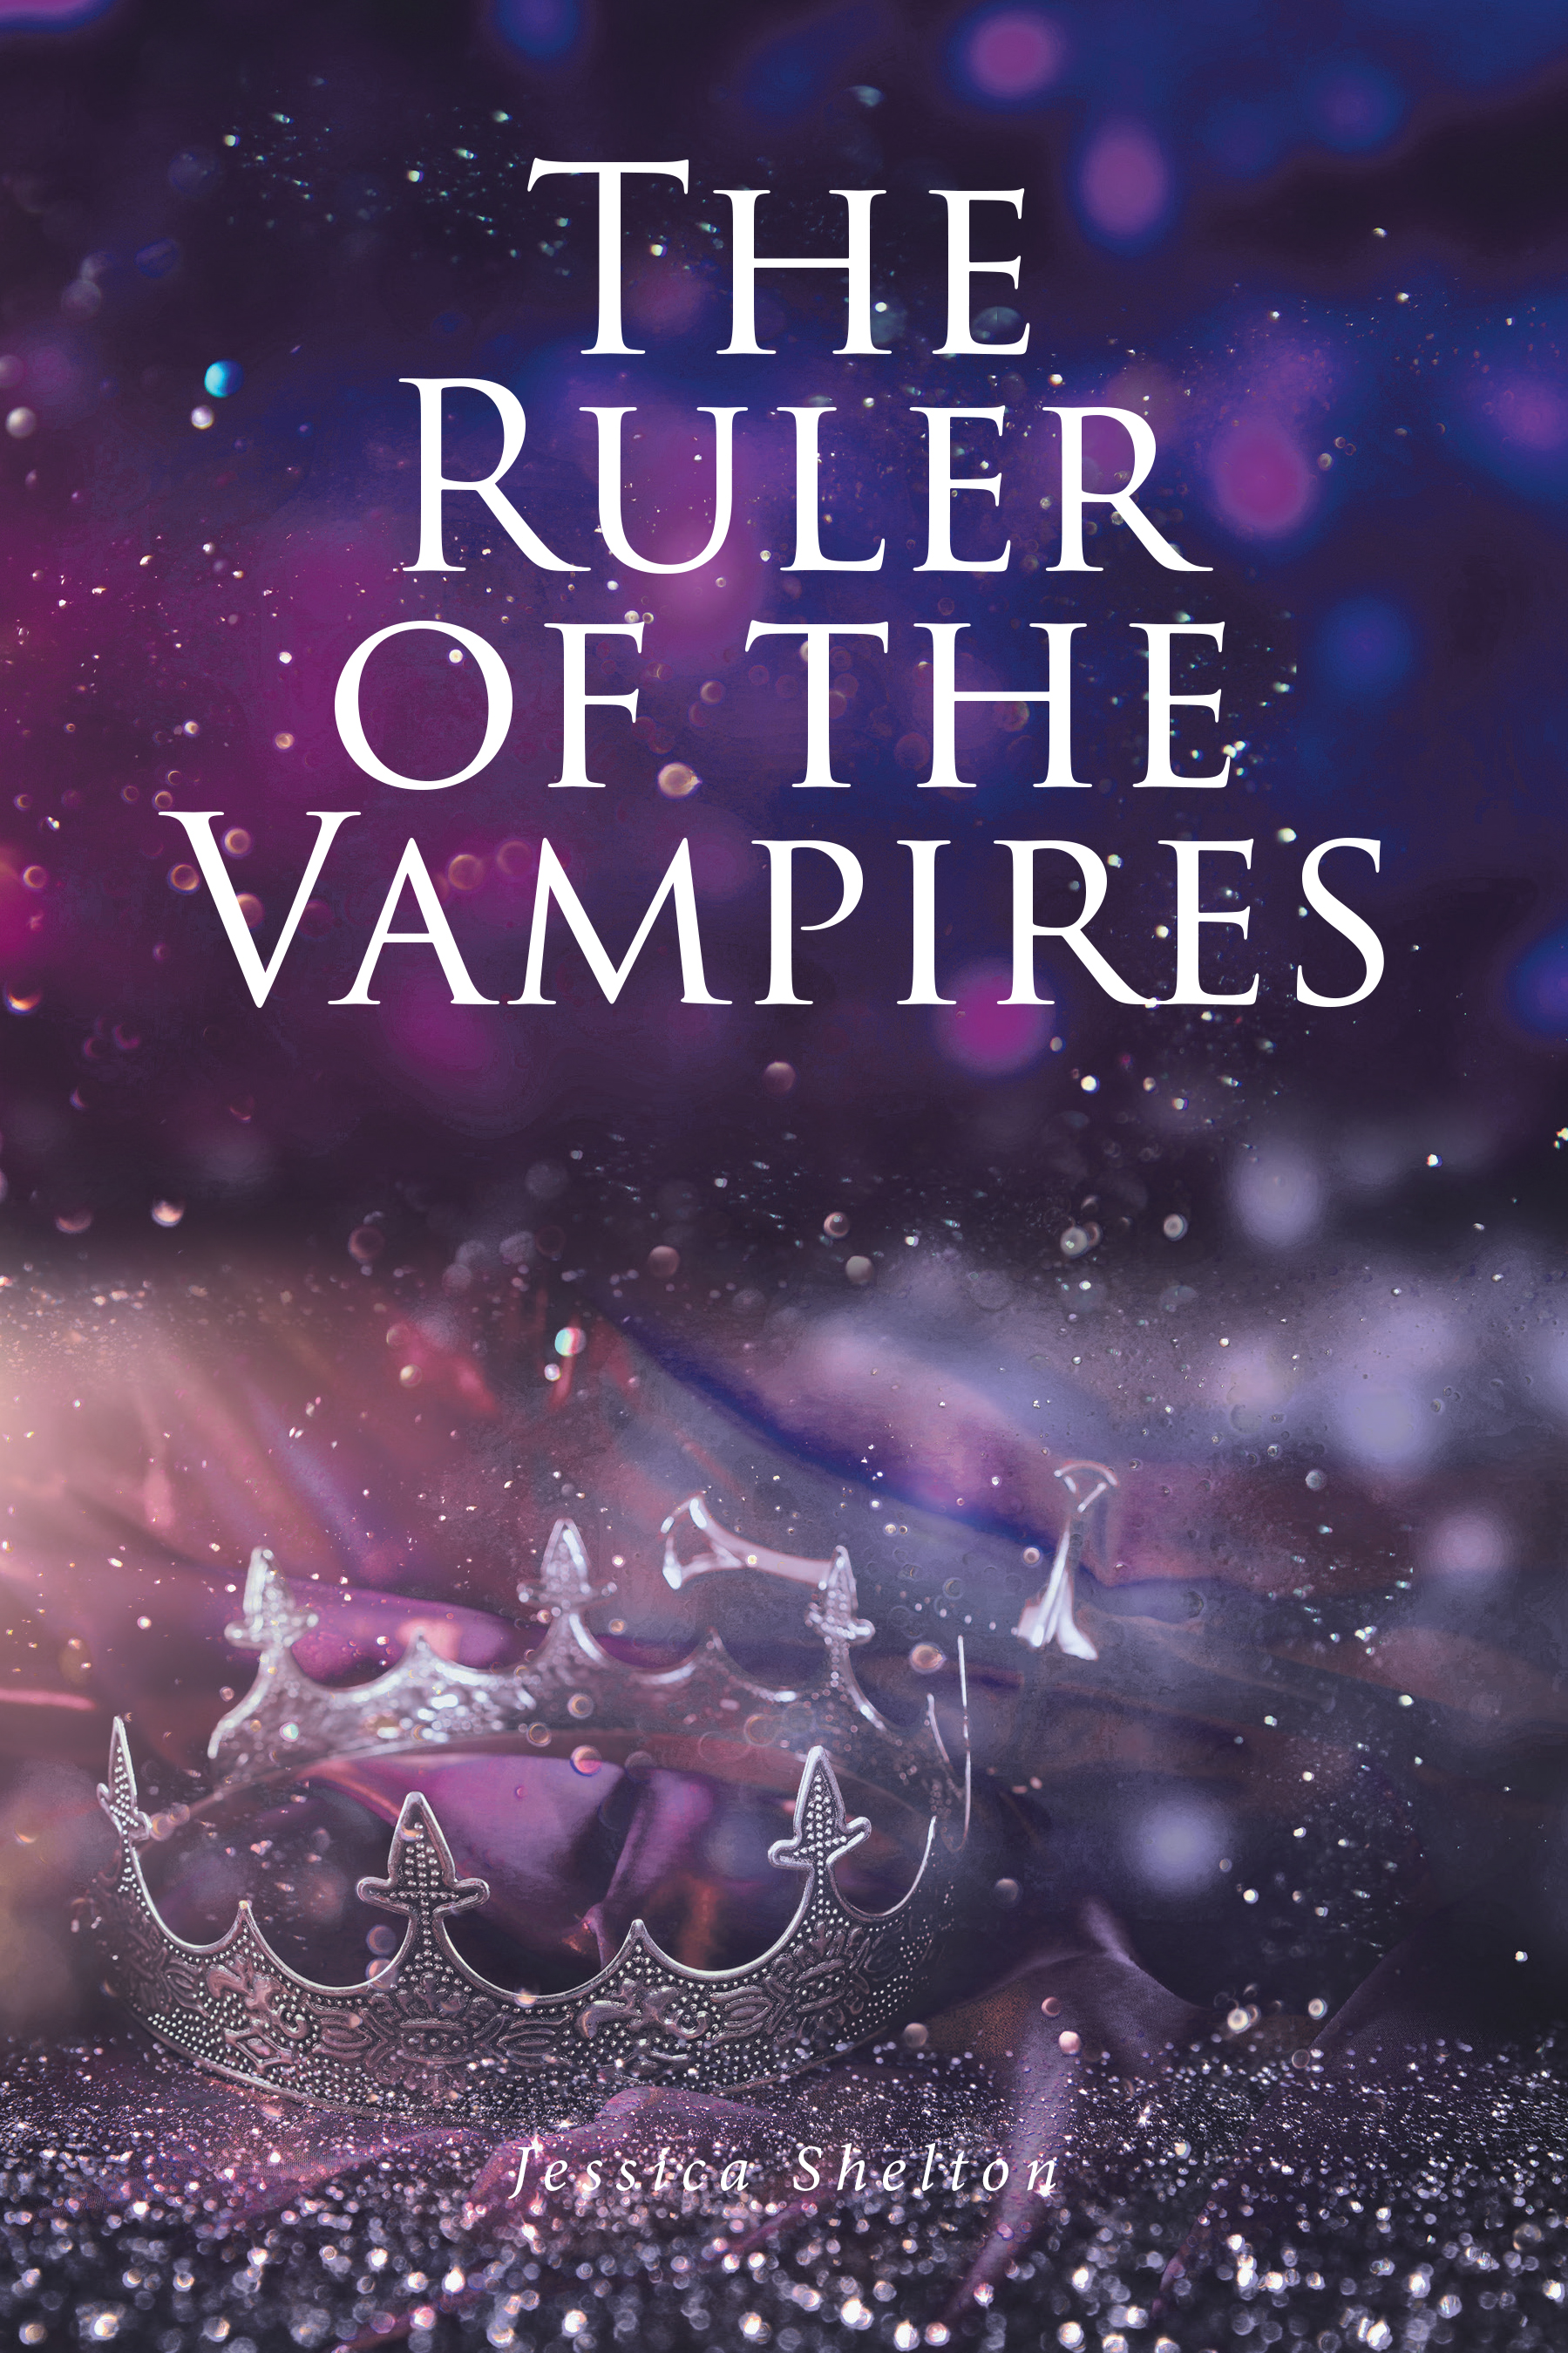 Jessica Shelton’s New Book "The Ruler of the Vampires" Centers Around a Young Girl’s Accent to Power in the Dark Underworld of Vampires as She Grapples with Her New Life